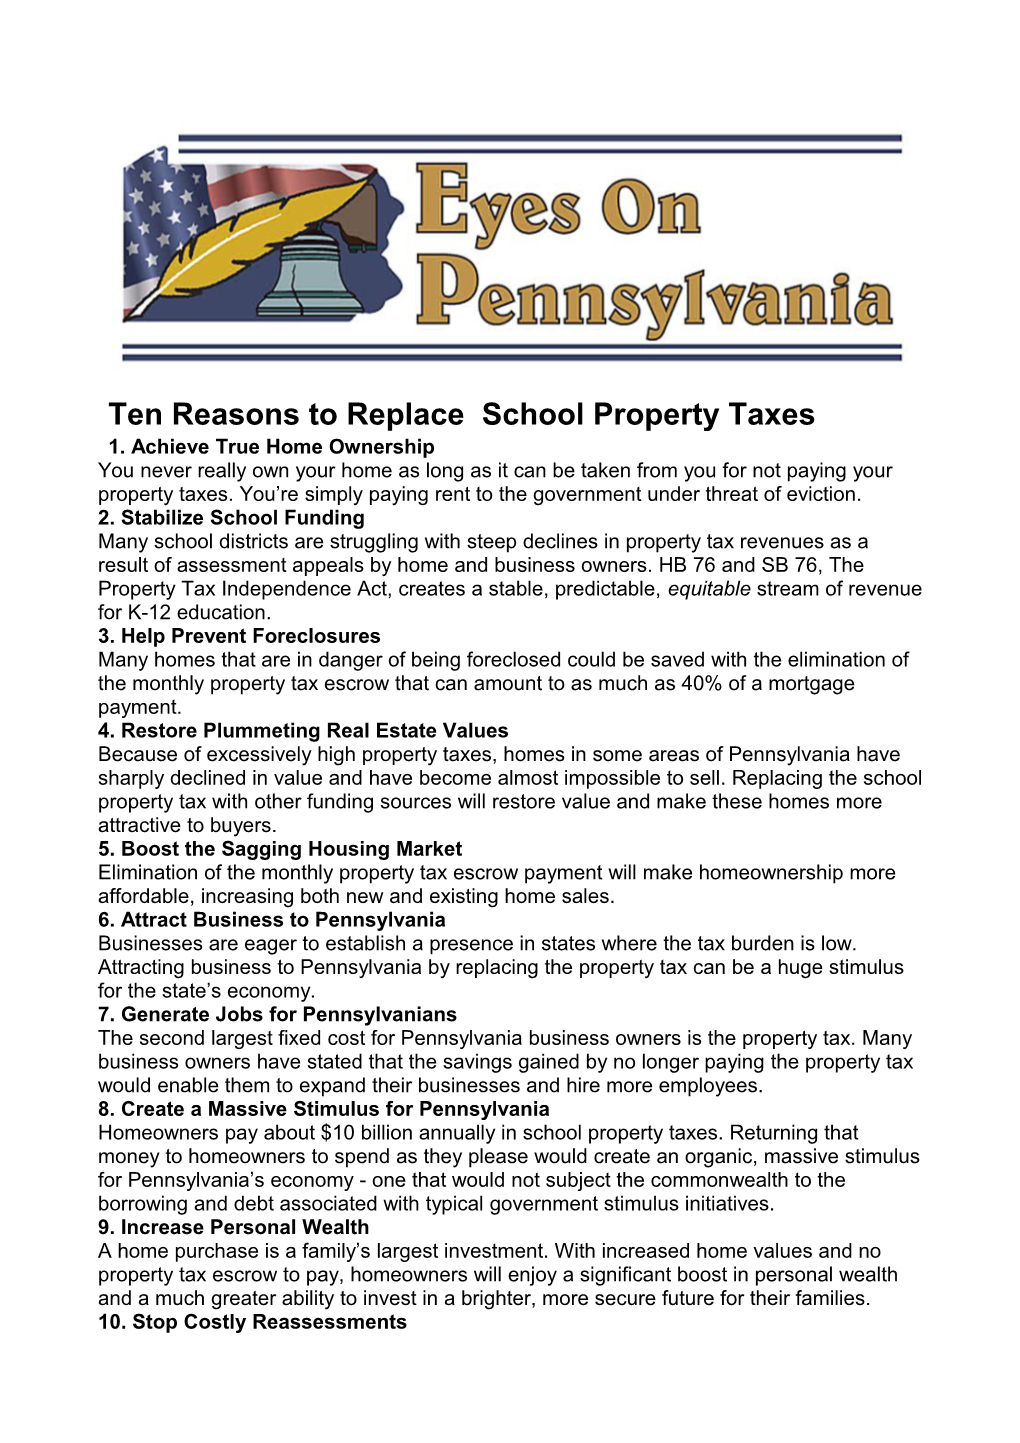 Ten Reasons to Replace School Property Taxes